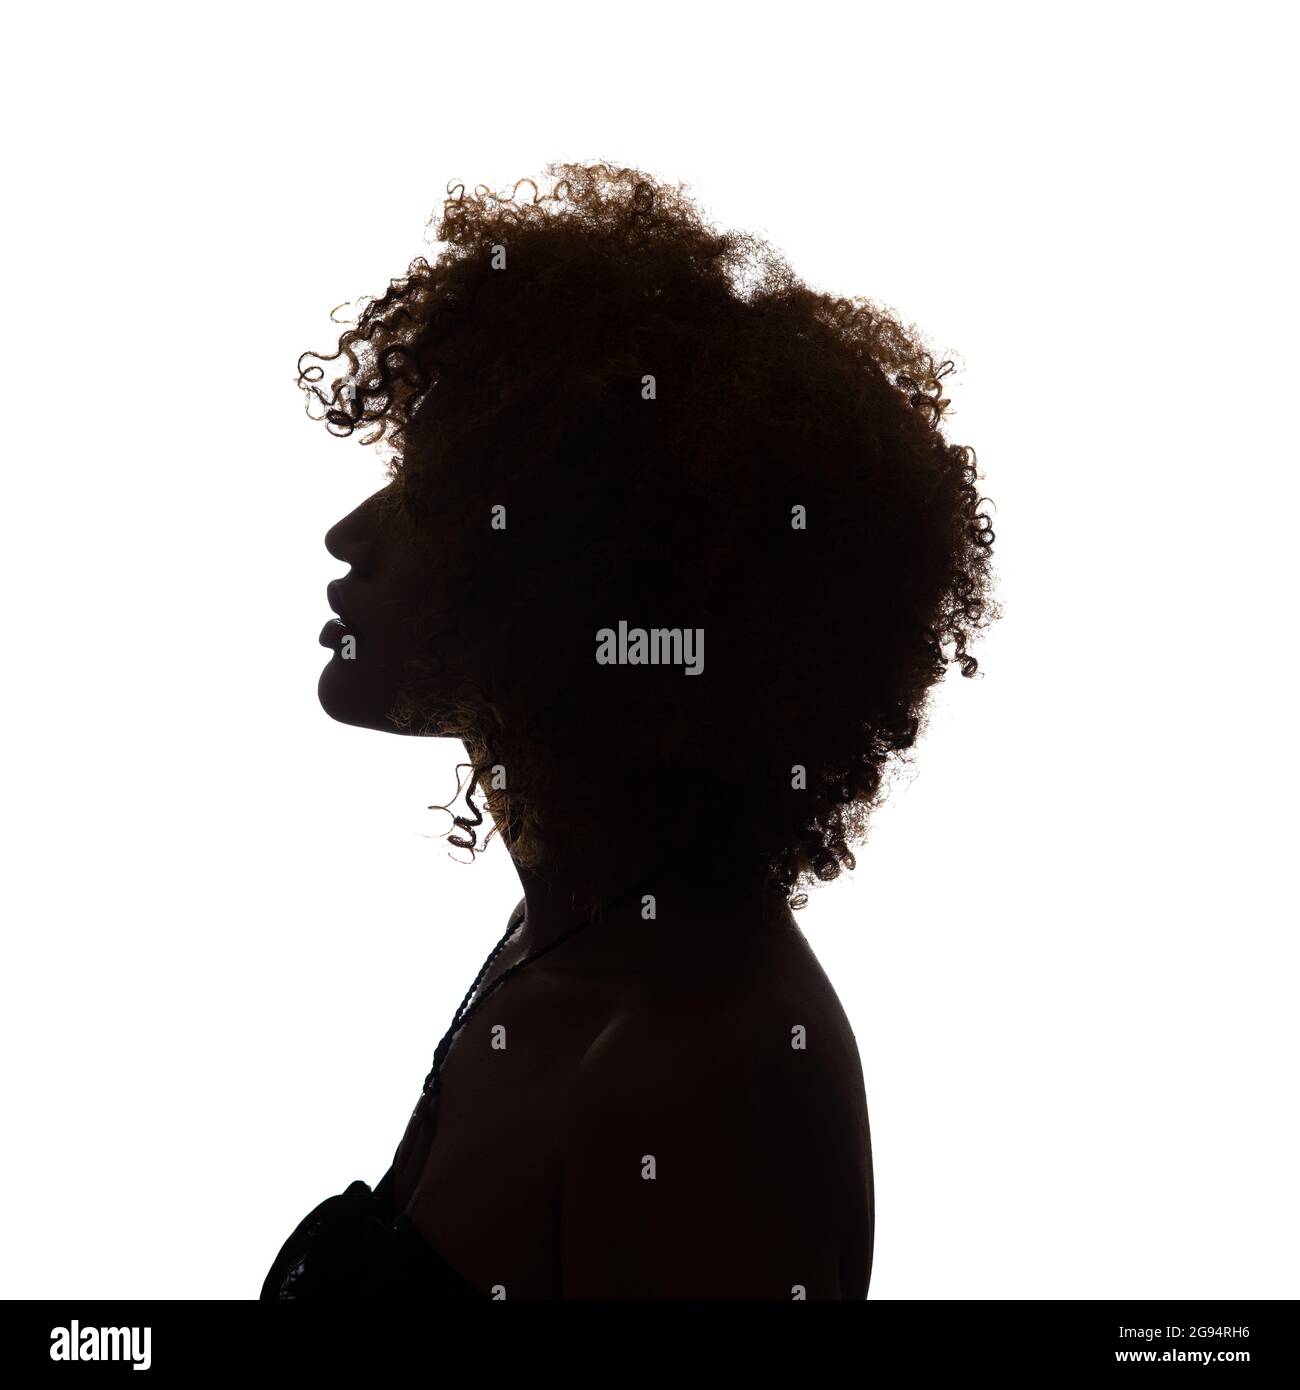 Black profile of an African woman on a white background, shaded silhouette, head and shoulders. Stock Photo